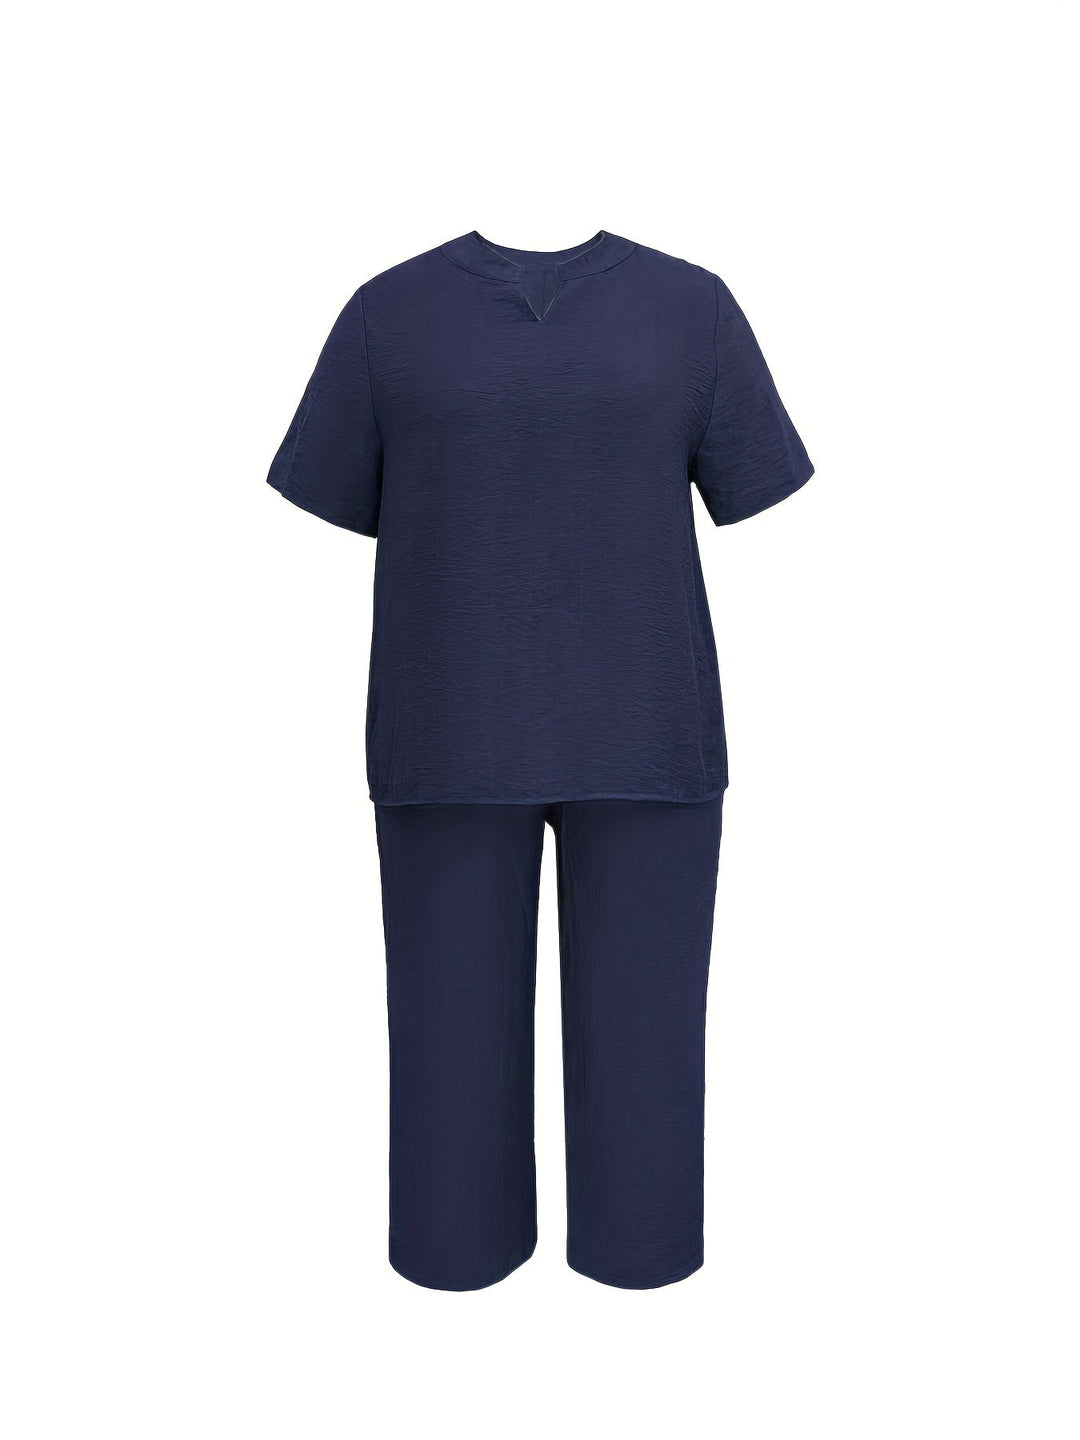 Chic All-day Wear Short Sleeve Top & Wide Leg Pants Gen U Us Products